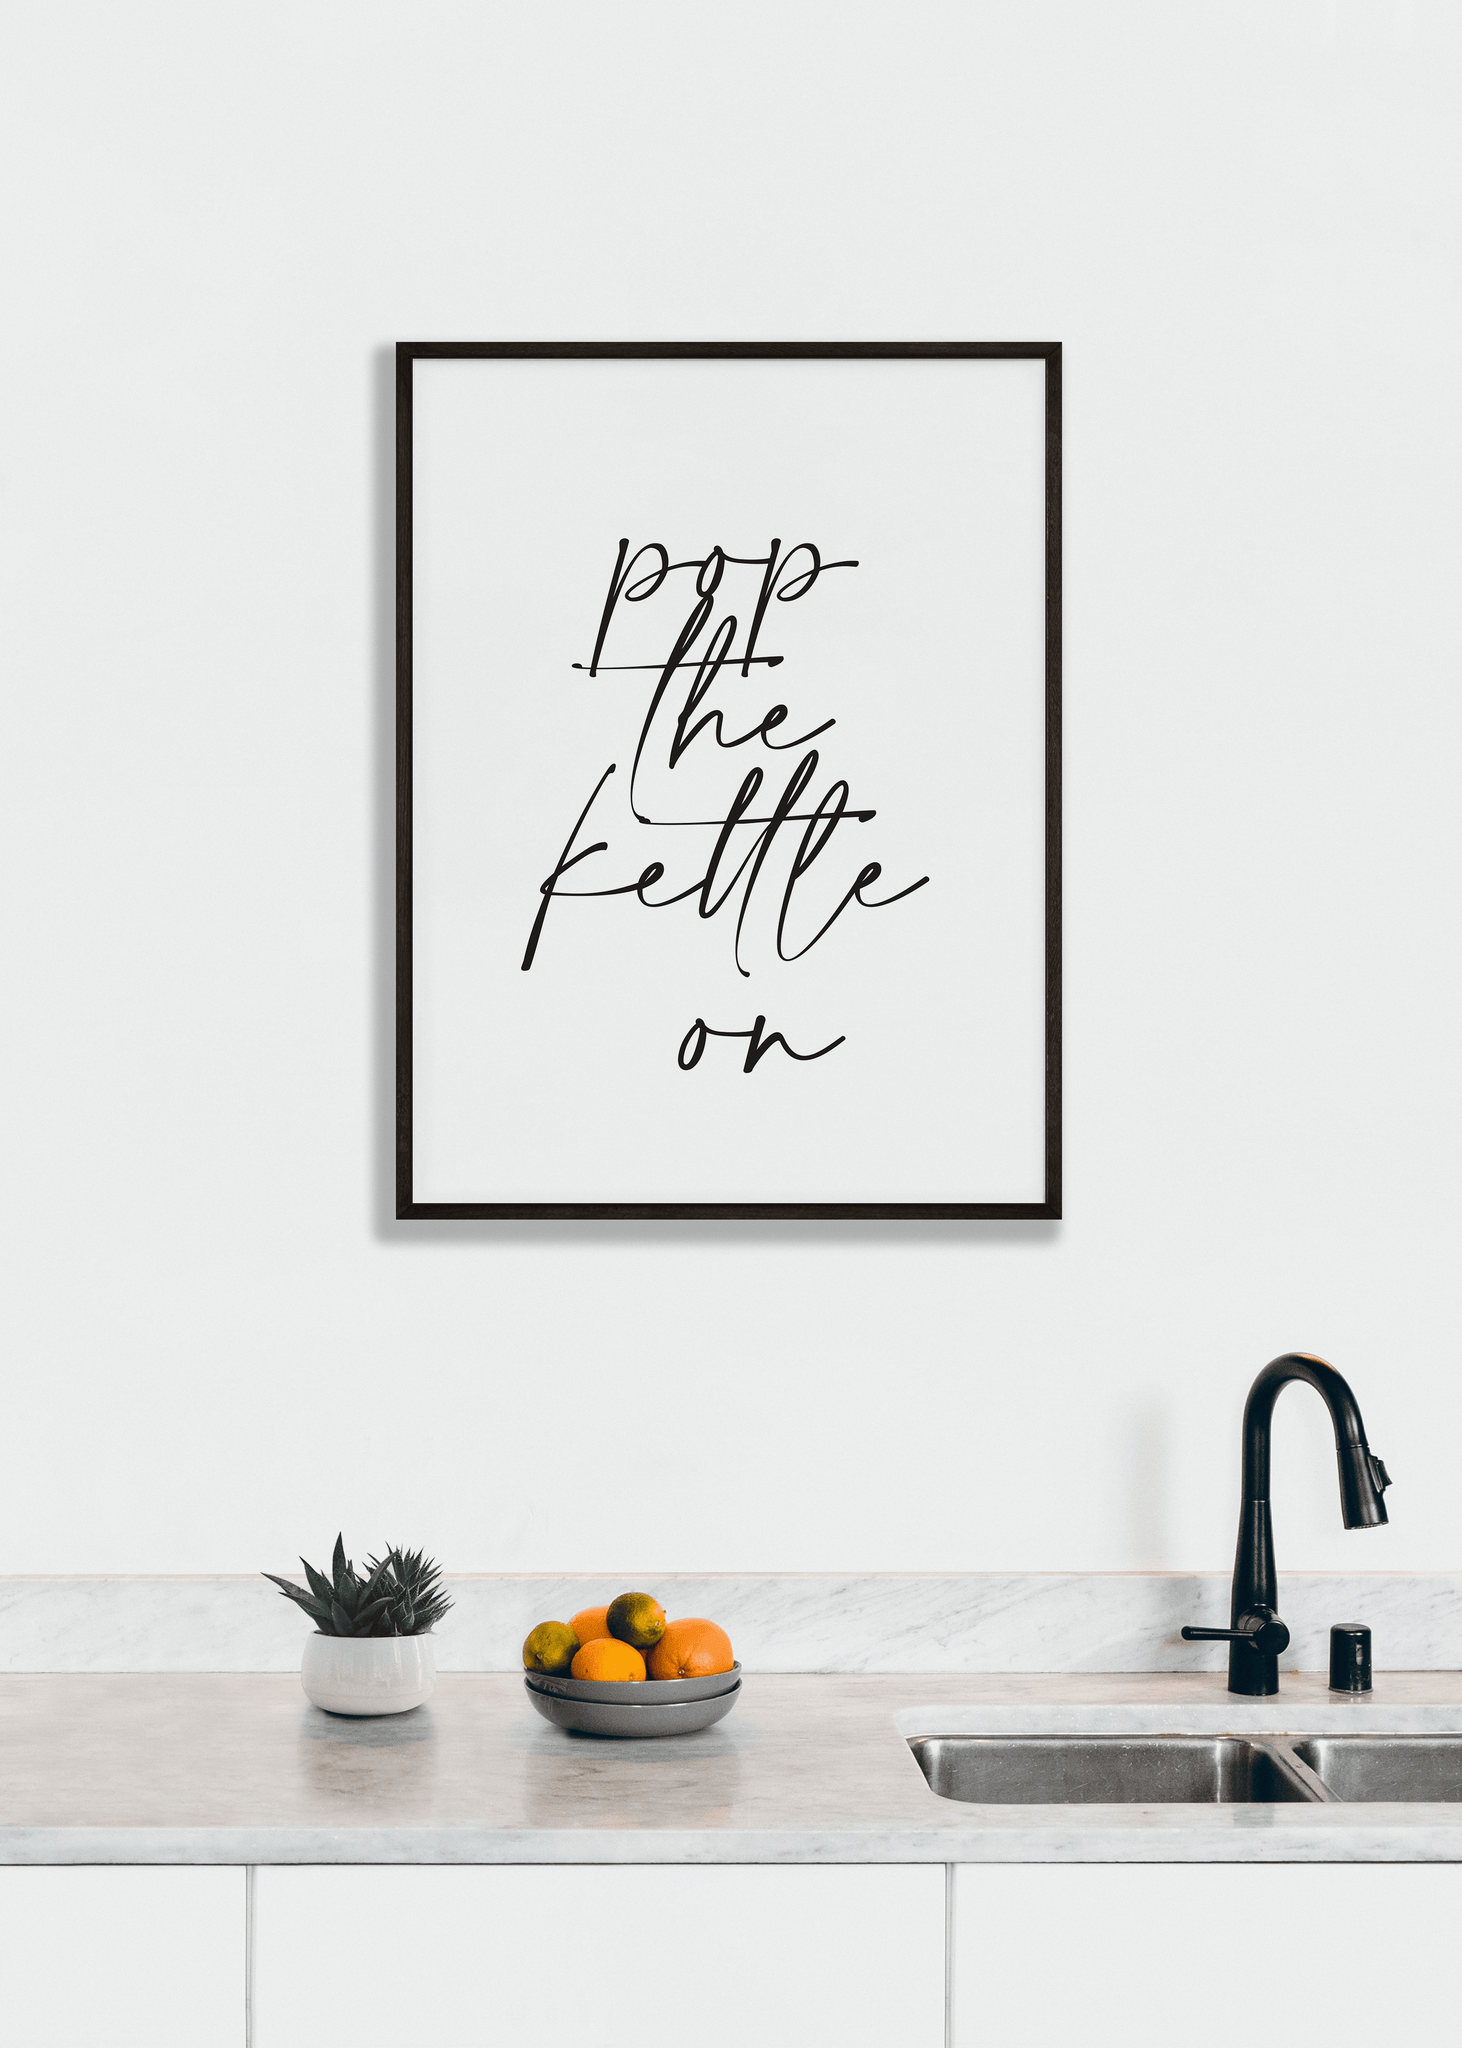 Pop The Kettle On Print Poster